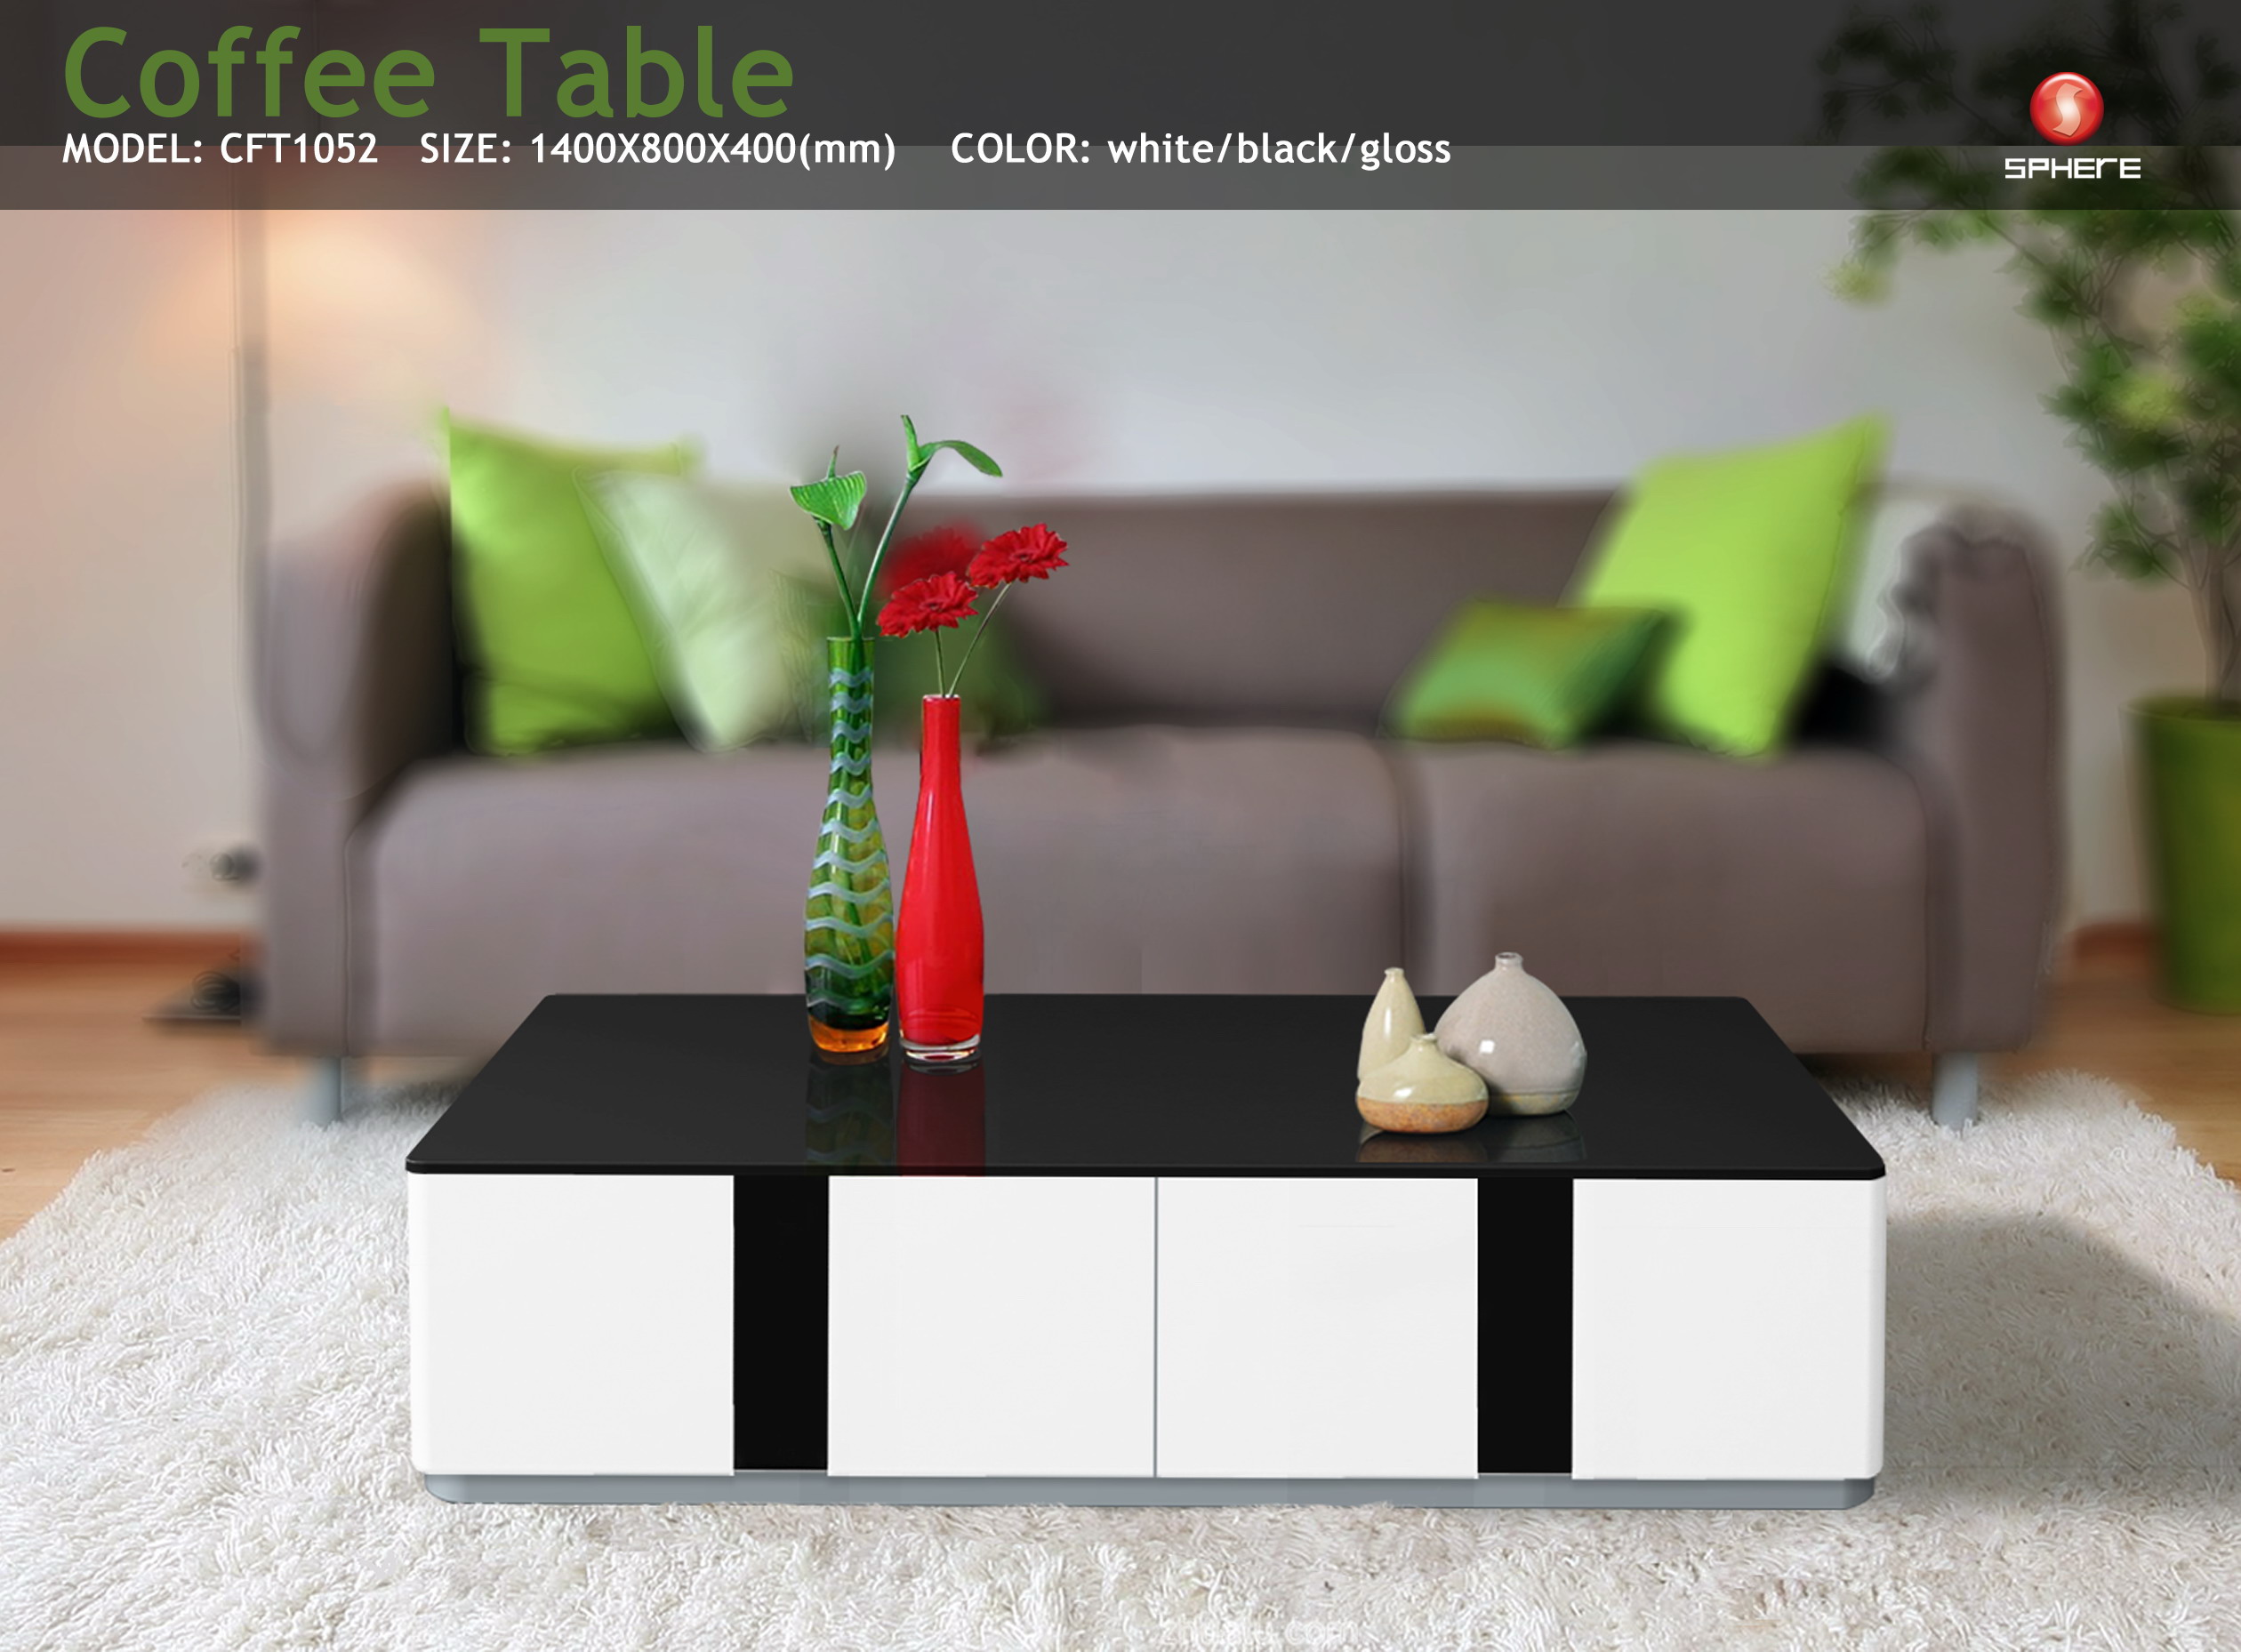 CFT1052 COFFEE TABLE